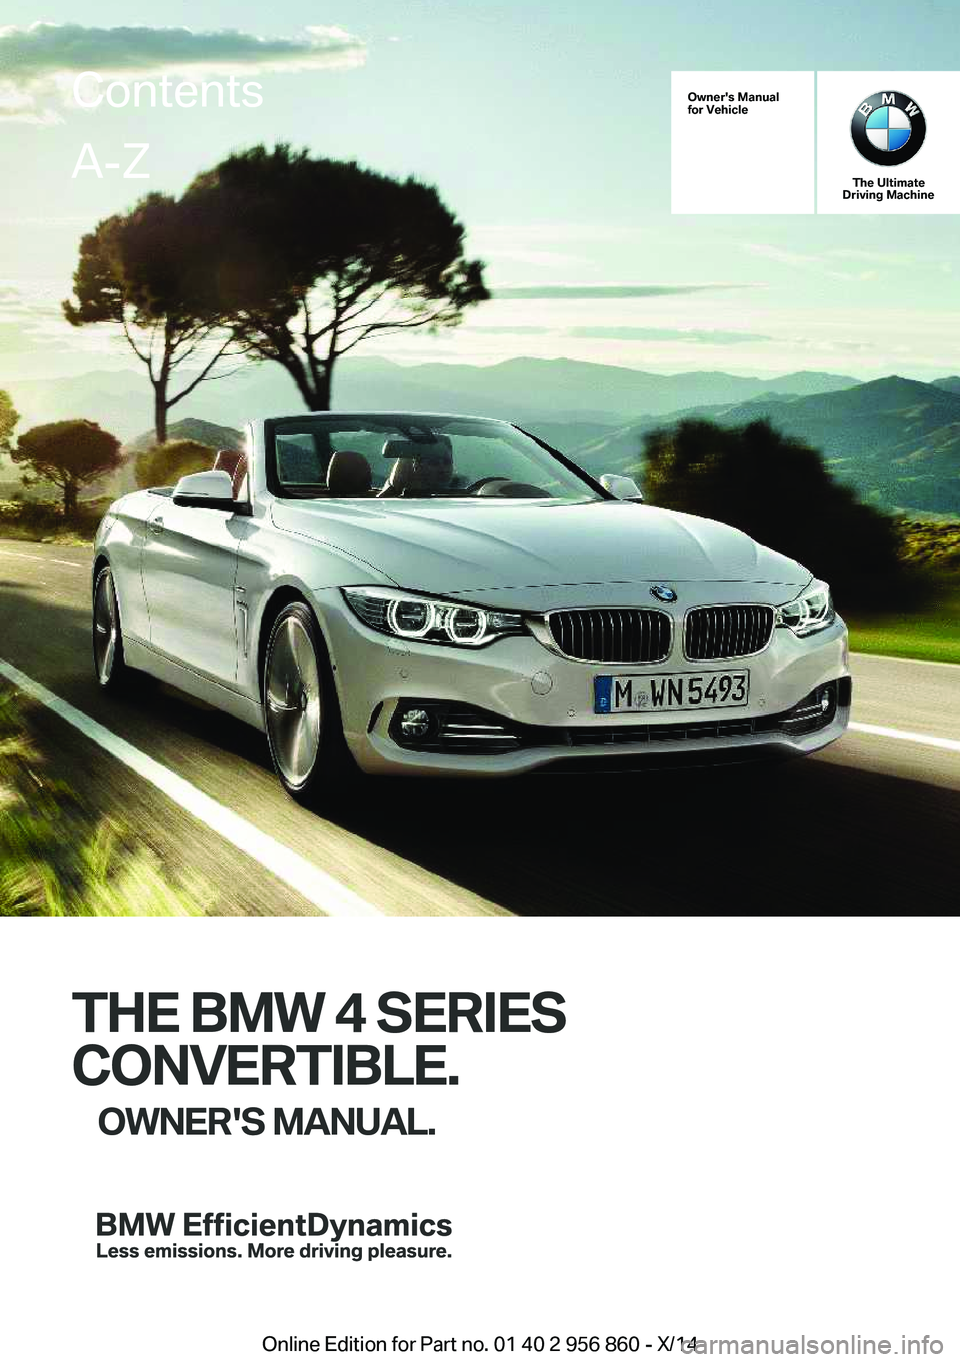 BMW 435I CONVERTIBLE 2014  Owners Manual Owner's Manual
for Vehicle
The Ultimate
Driving Machine
THE BMW 4 SERIES
CONVERTIBLE. OWNER'S MANUAL.
ContentsA-Z
Online Edition for Part no. 01 40 2 956 860 - X/14   